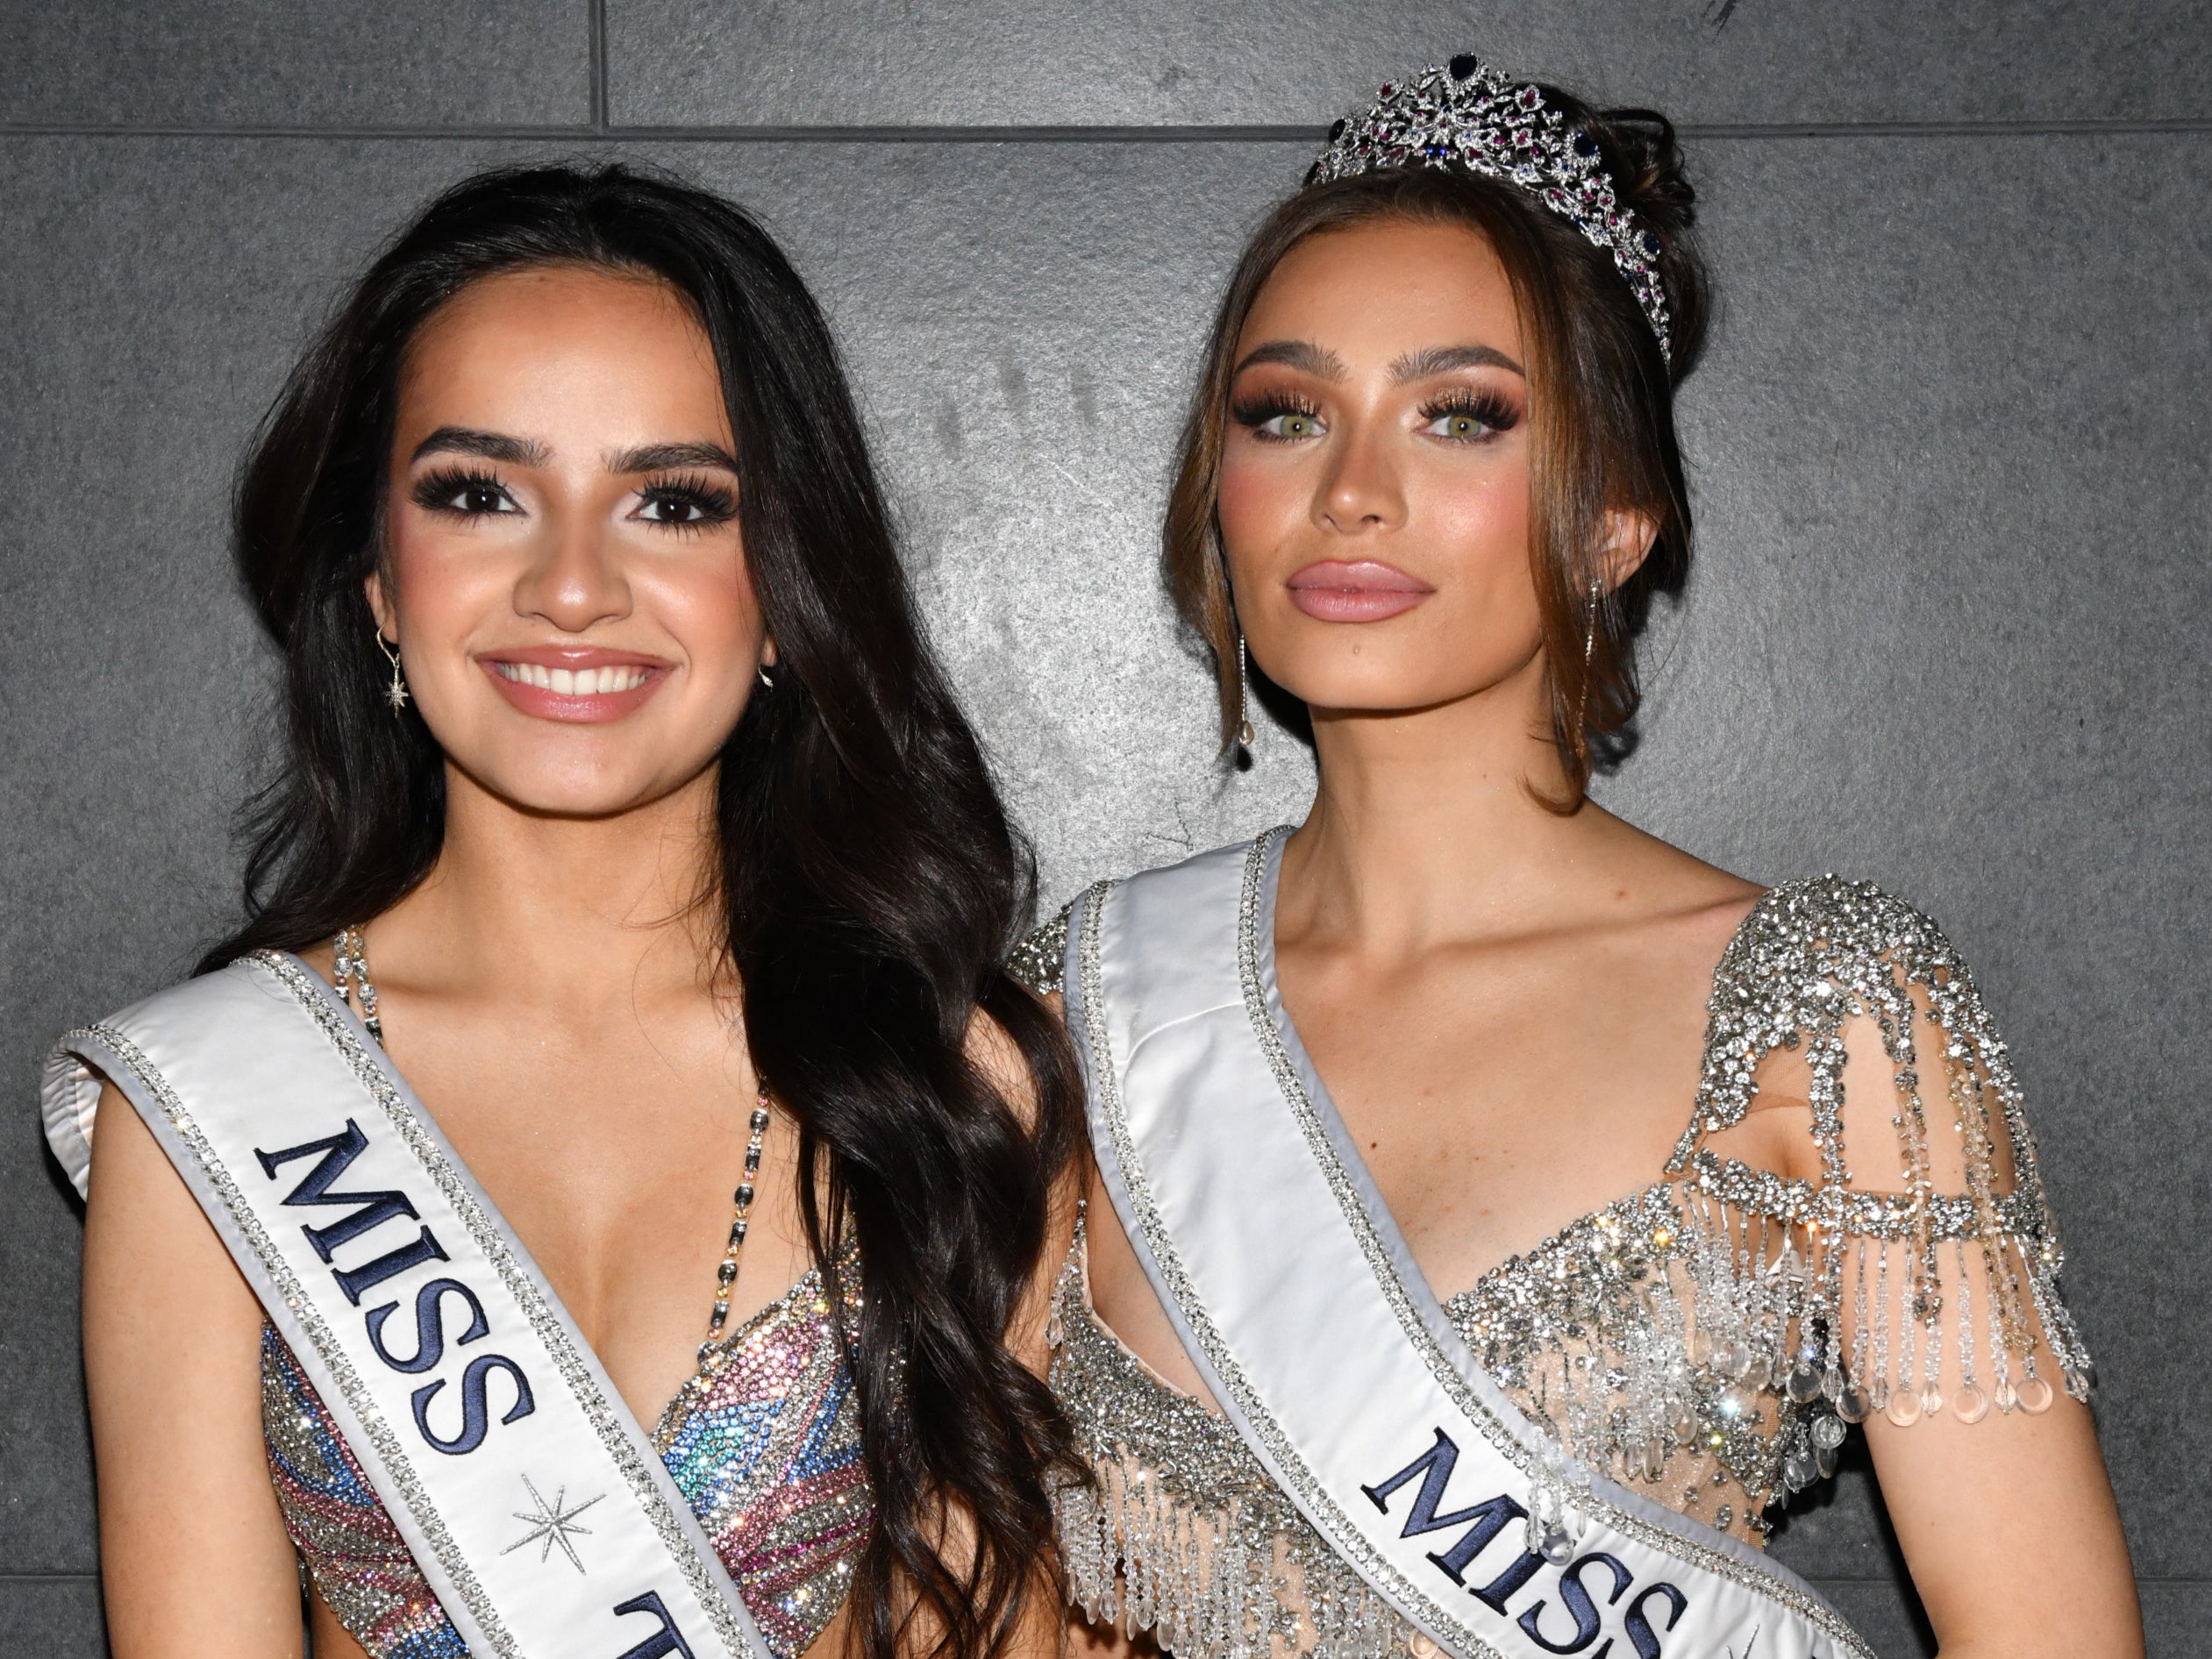 Miss Teen USA 2023, UmaSofia Srivastava and Miss USA 2023, Noelia Voigt recently resigned their crowns amid accusations of mistreament and mismanagement by the Miss USA Organization